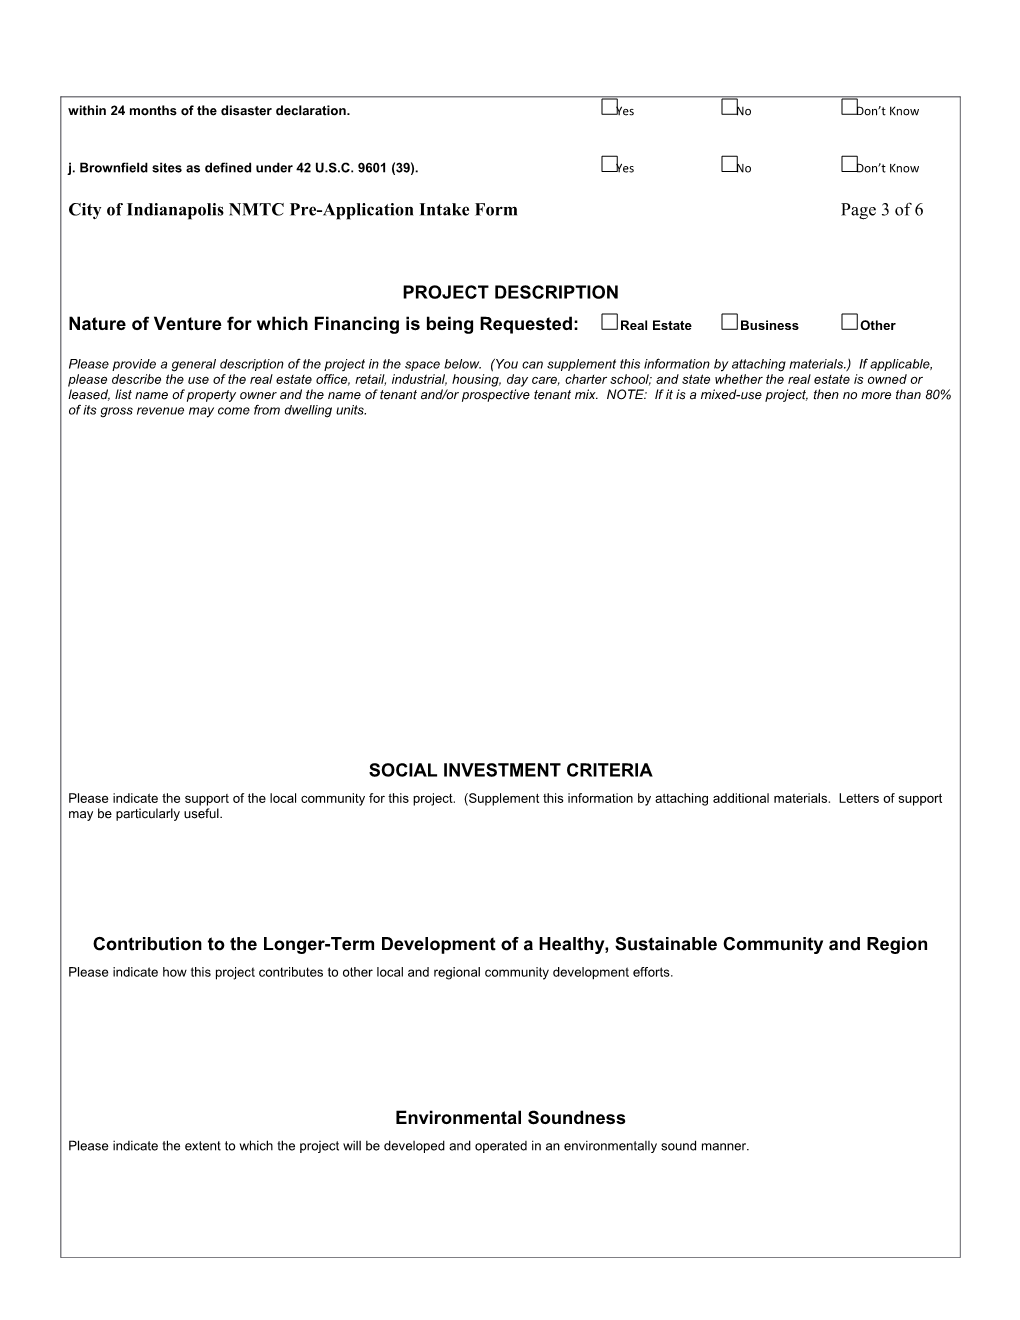 City of Indianapolis New Markets Tax Creditspre-Application Intakeform Page 1 of 6